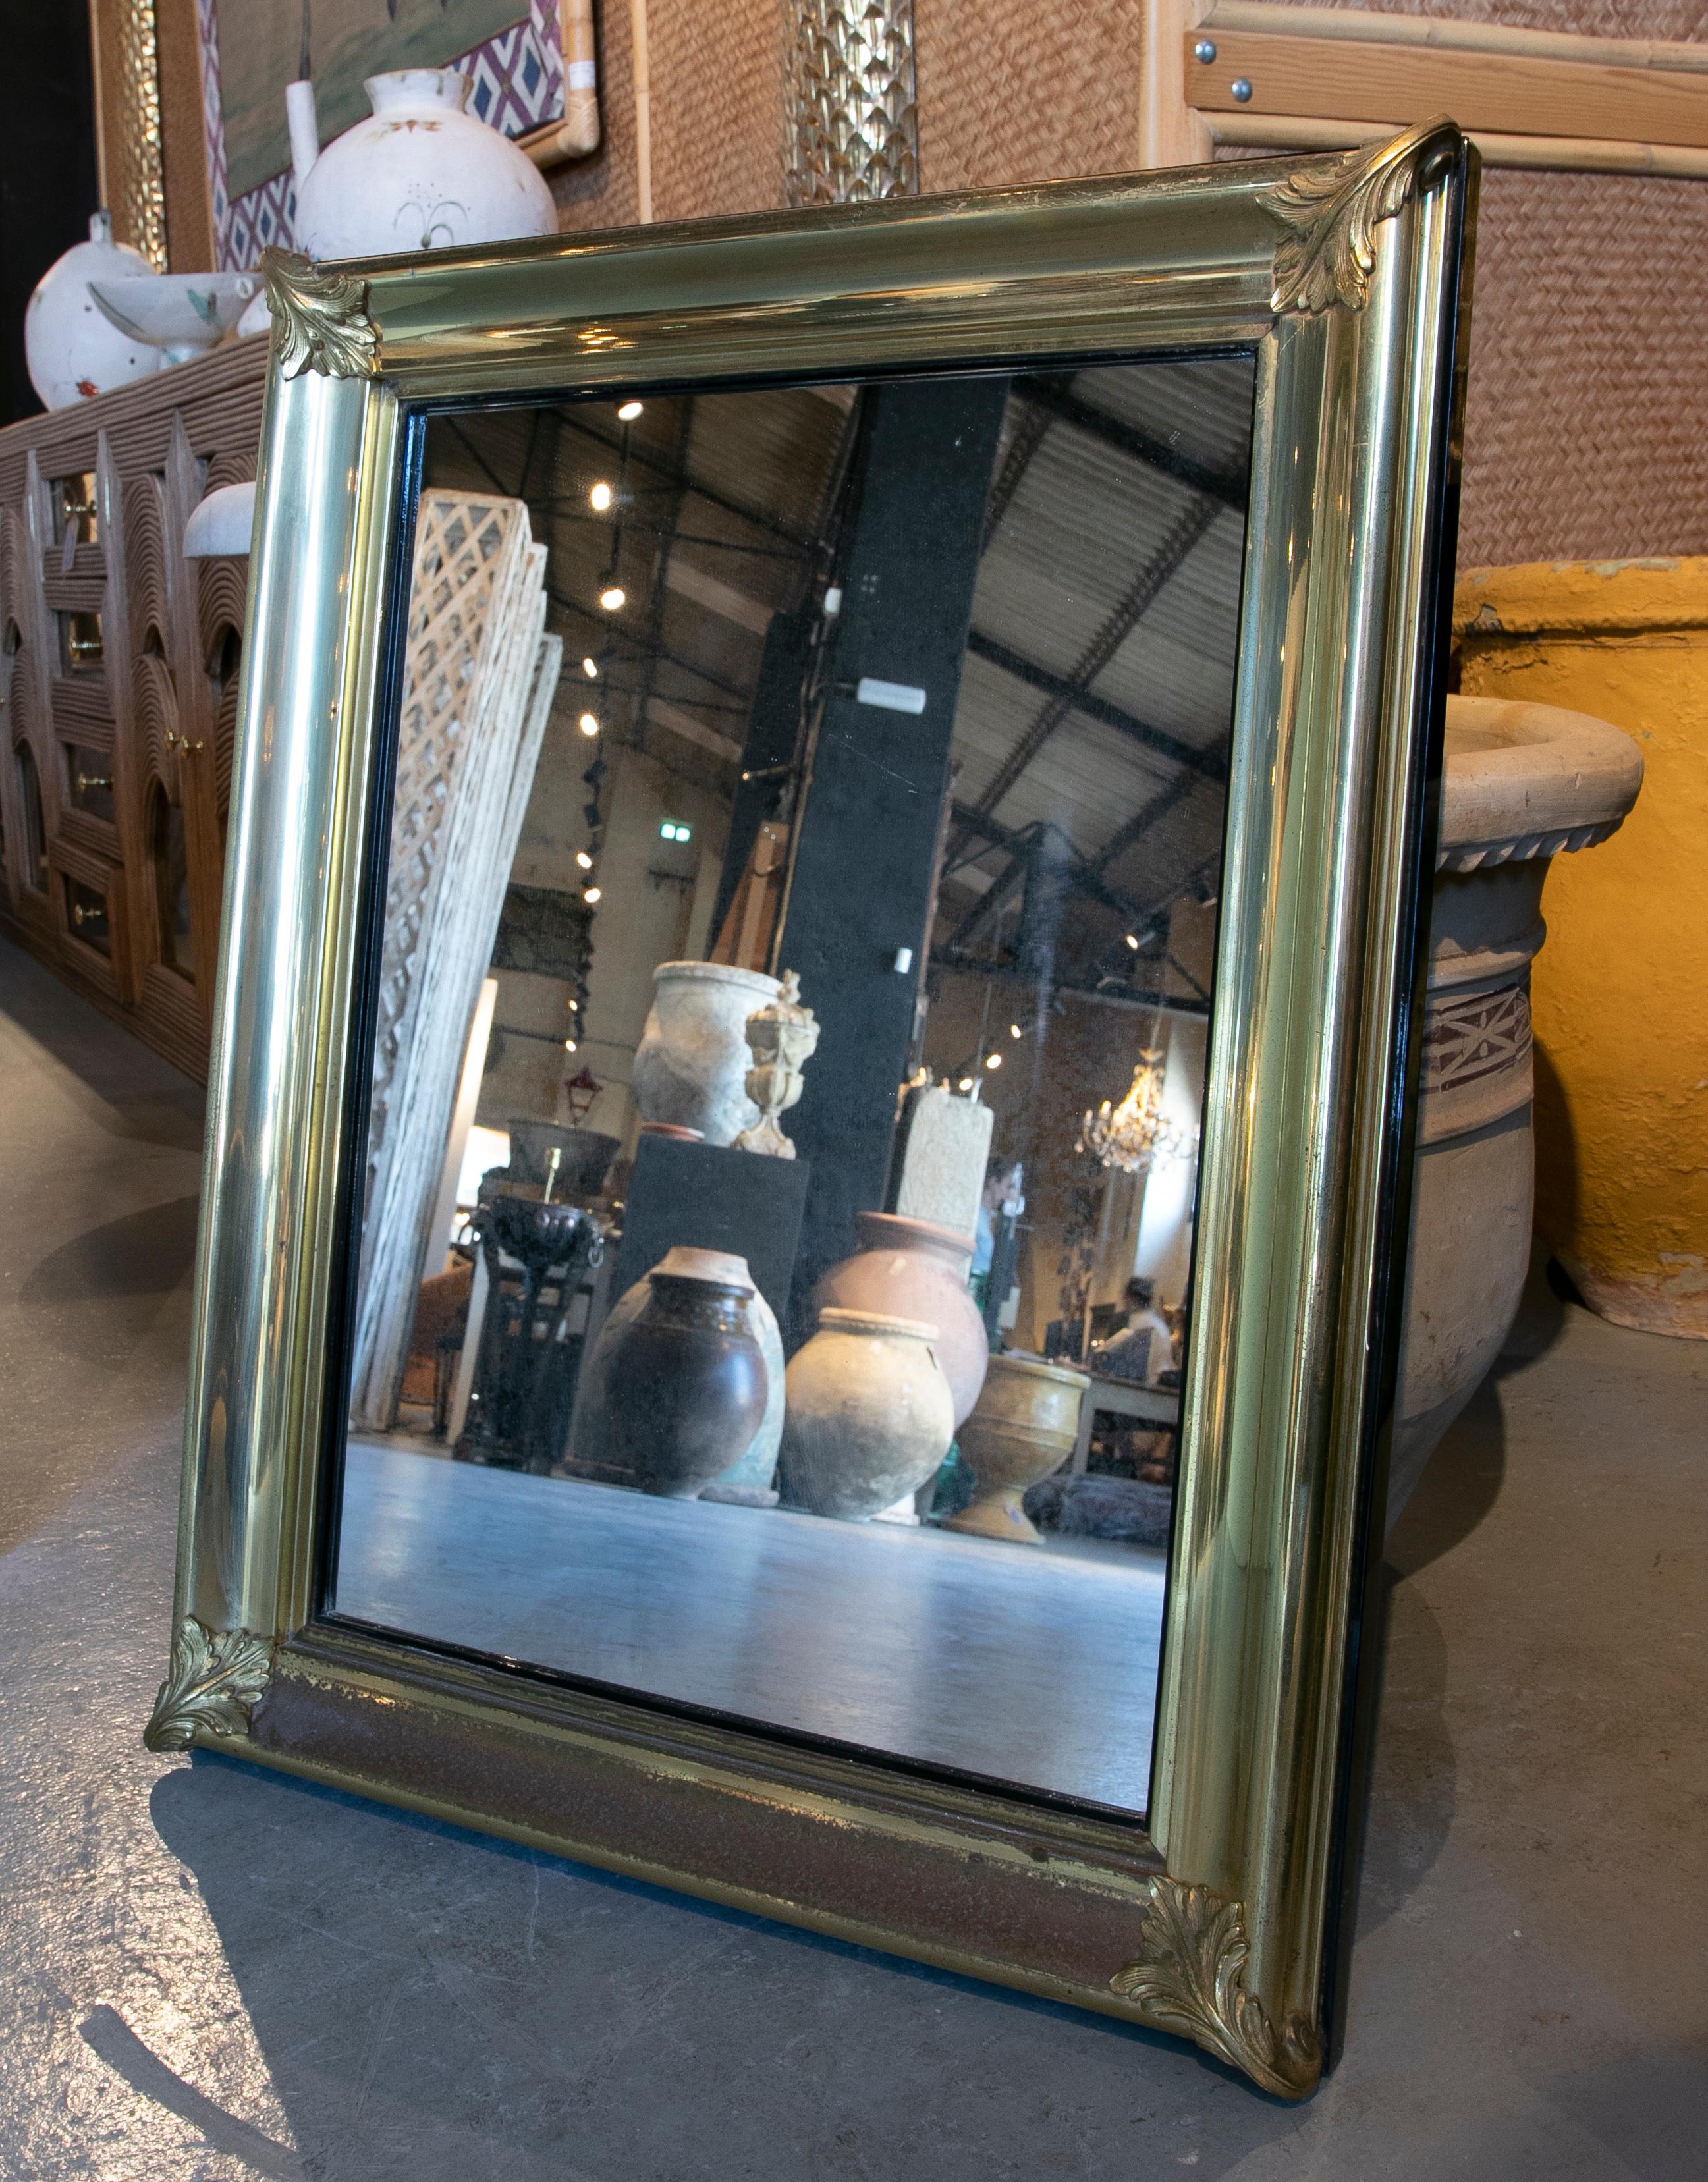 1970s Wall mirror made of metal and bronze. It has a wide frame with ornaments in the corners; plus said frame has a golden patina.